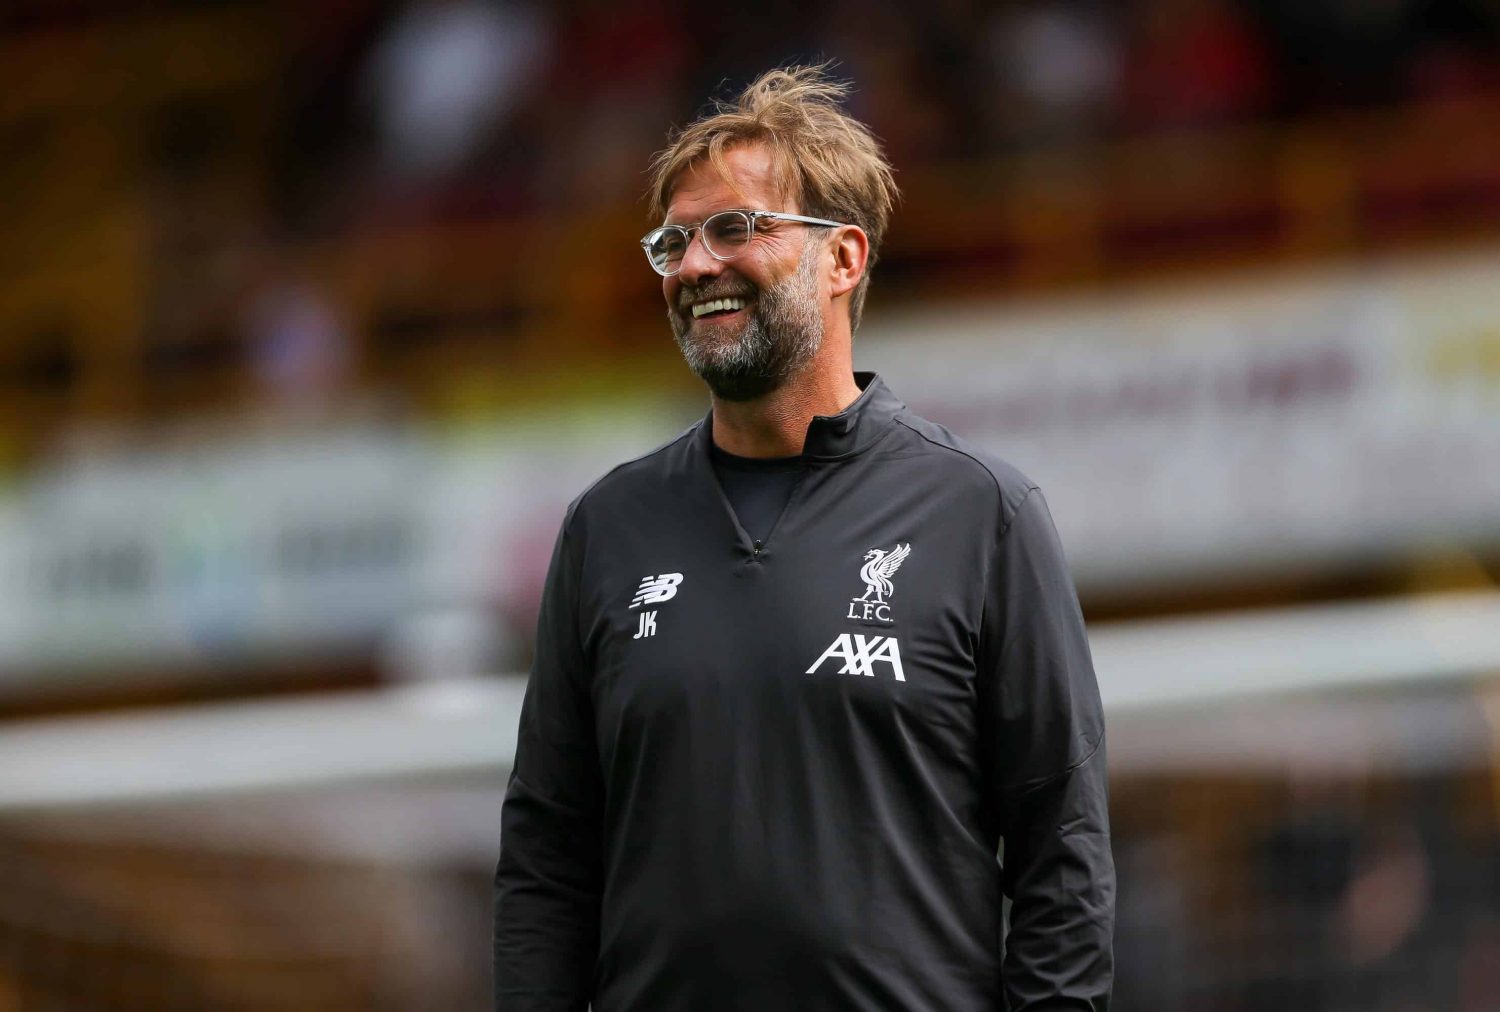 Liverpool’s Nike deal go-ahead as fitness boost ahead of Spurs game